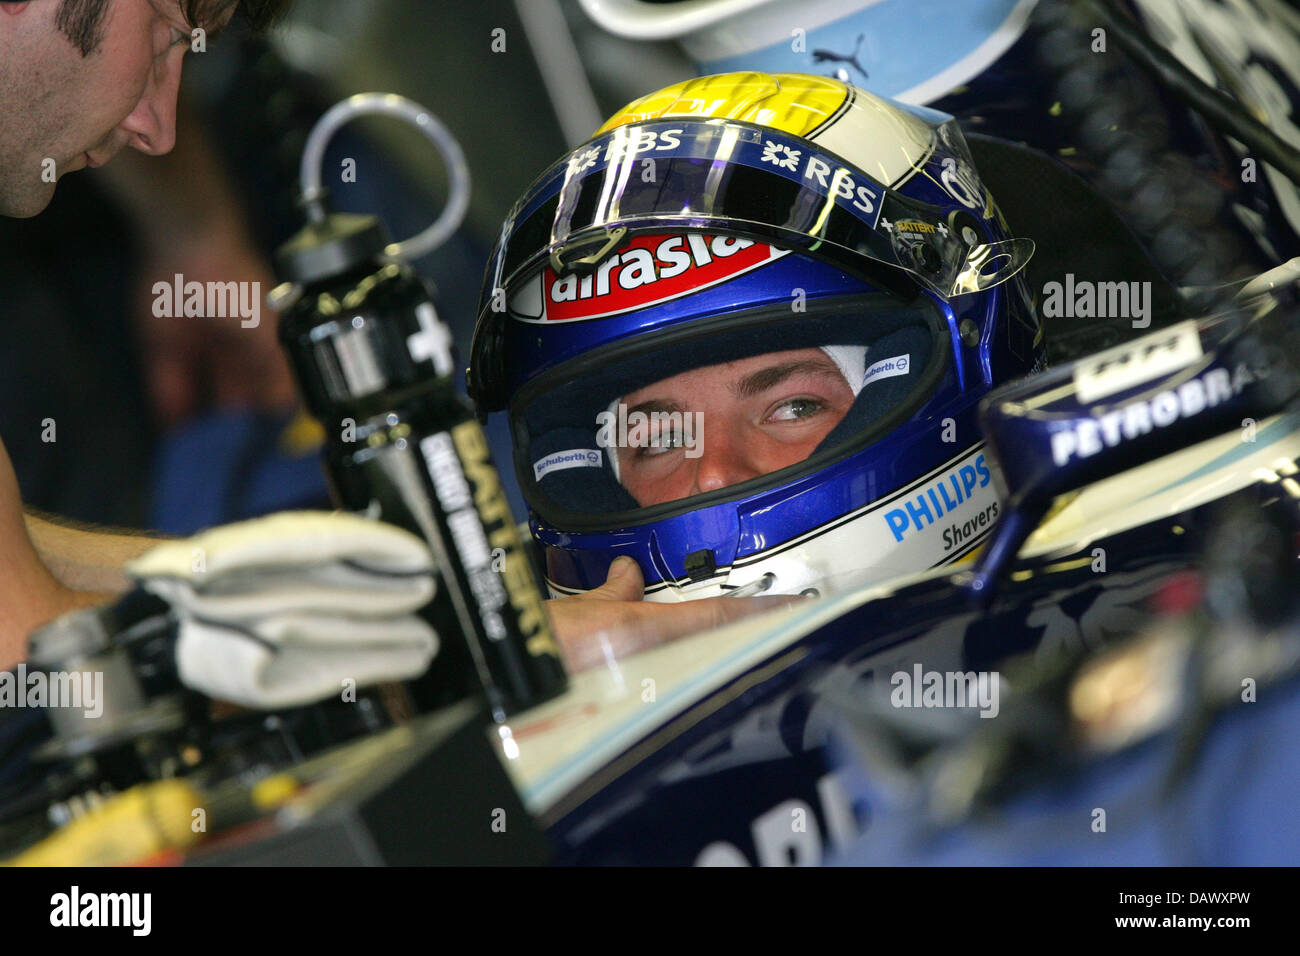 German Formula One driver Nico Rosberg of Williams sits in his race car during the second practice session at the Circuit de Catalunya race track near Barcelona, Spain, 11 May 2007. The 2007 Formula 1 Grand Prix of Spain takes place on 13 May. Photo: JENS BUETTNER Stock Photo